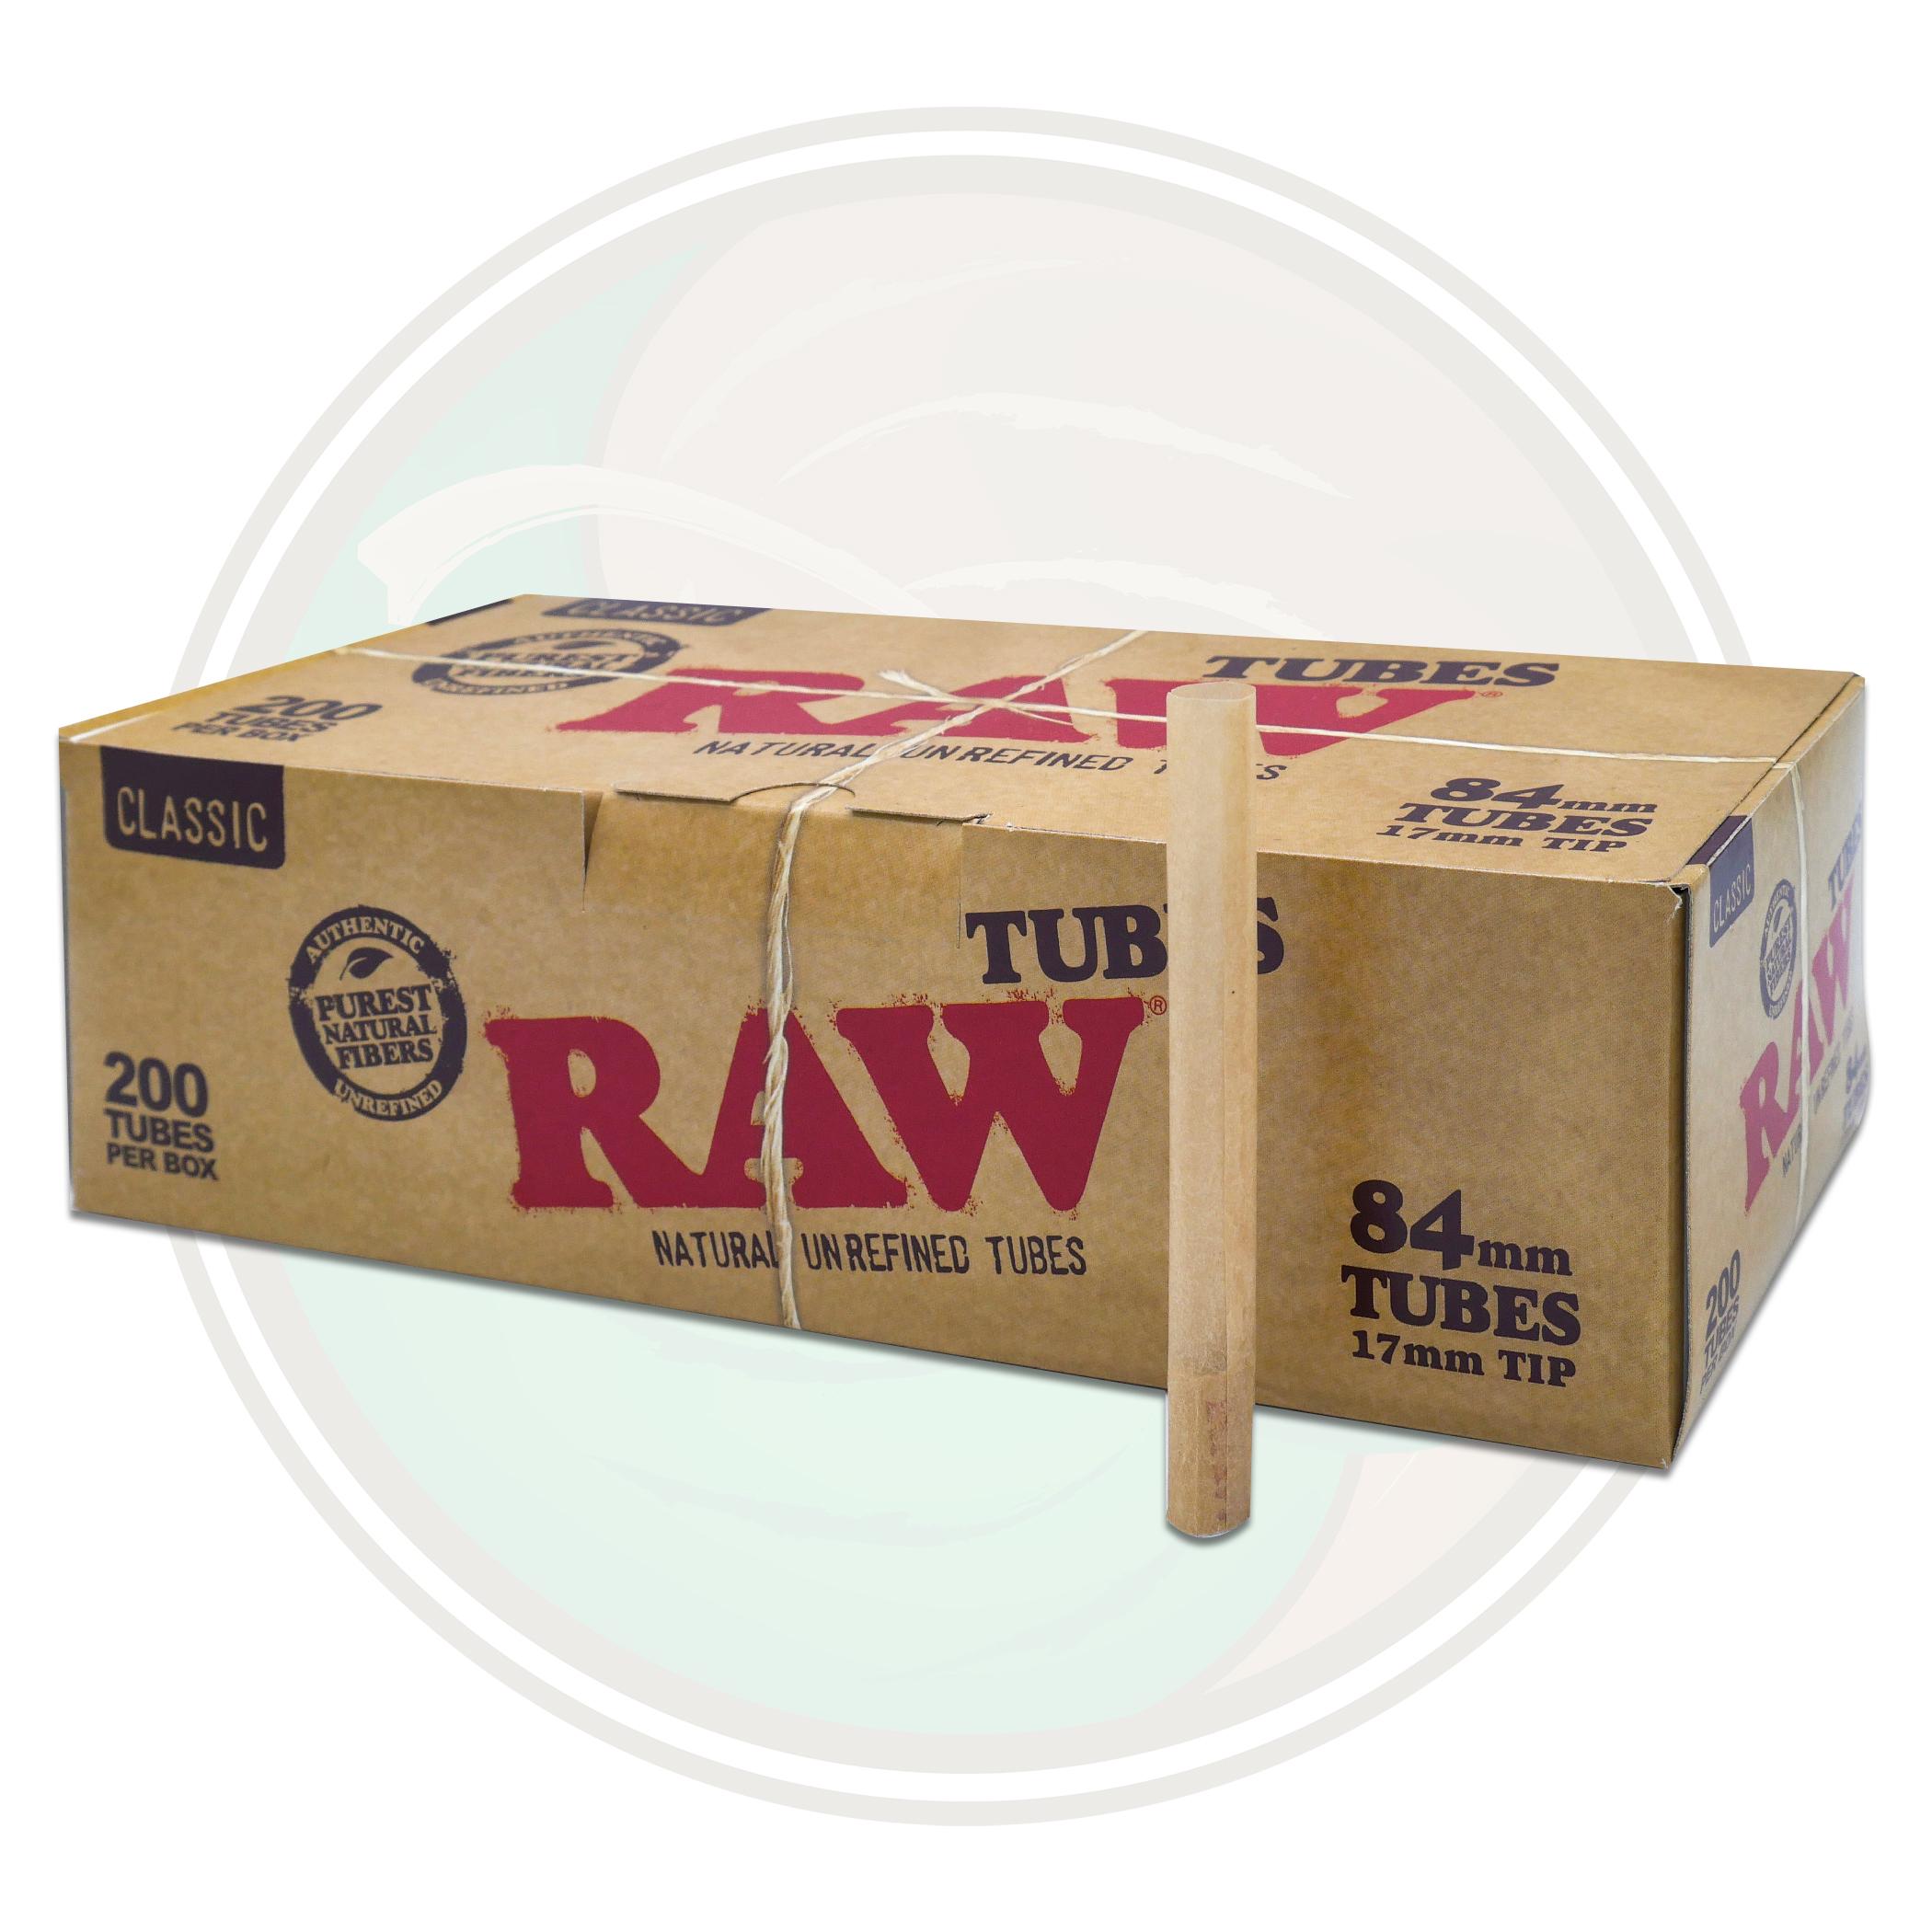 Custom CLEAR Cellulose ROLLING PAPERS  Rolling Paper Manufacturing – ROLL  YOUR OWN PAPERS.COM